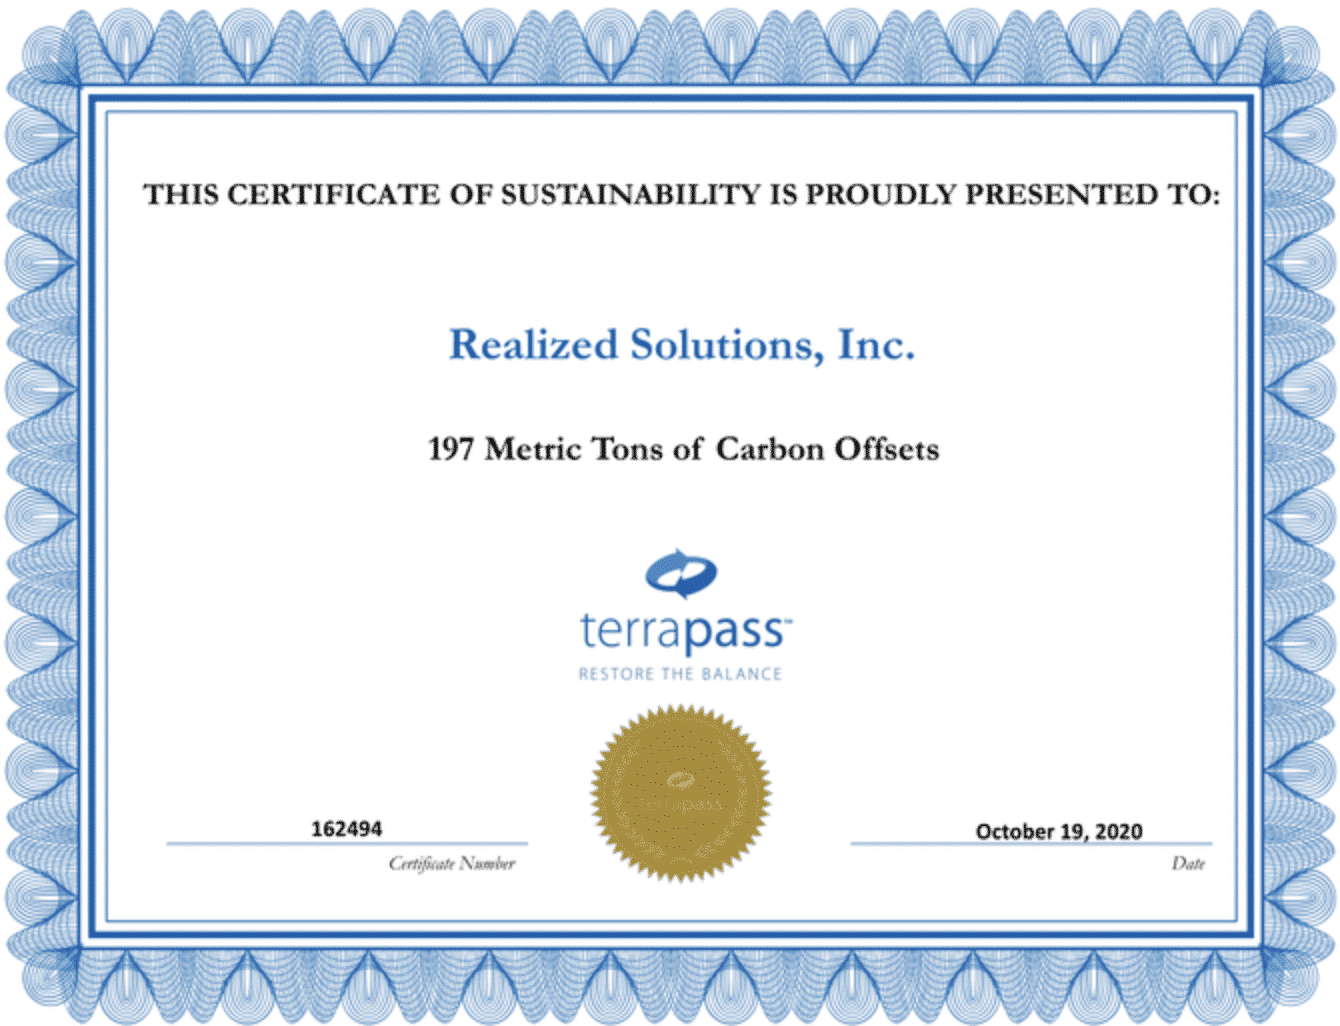 Realized Solutions 2020 Certificate